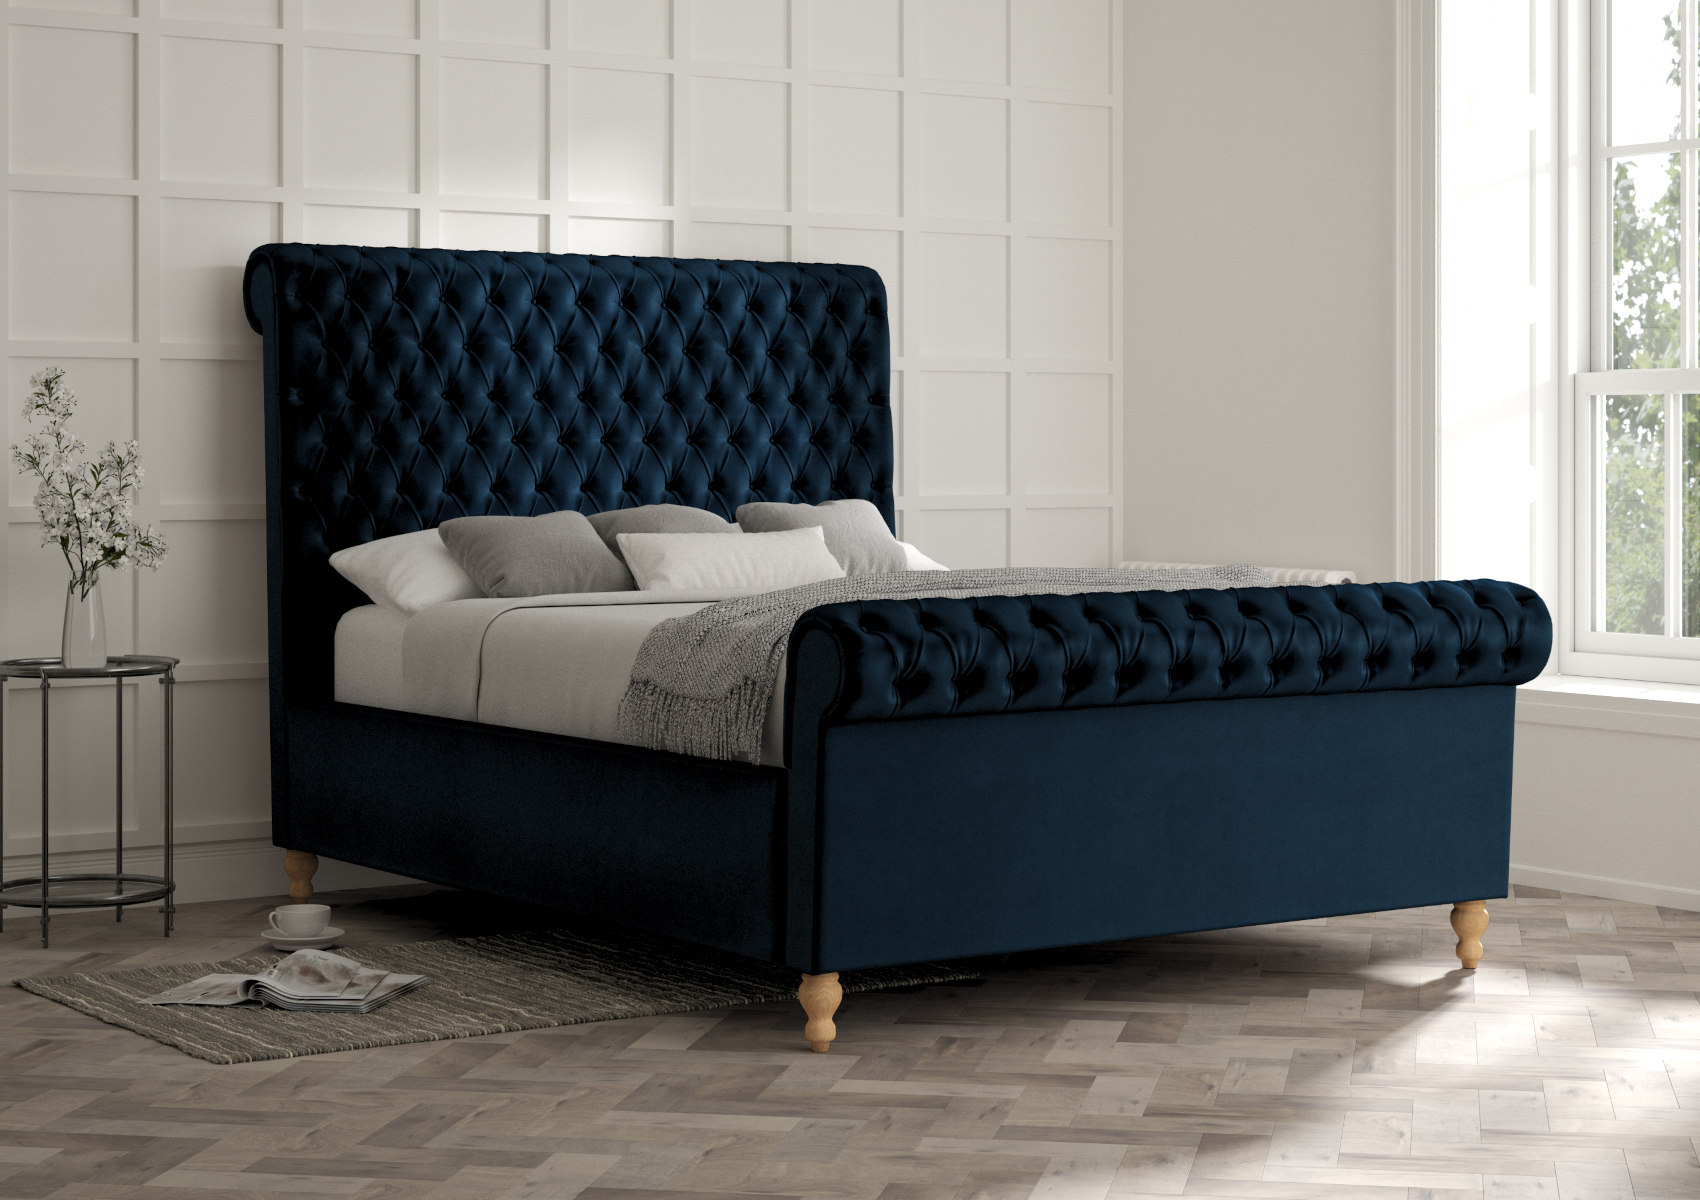 View Aldwych Velvet Navy Upholstered King Size Sleigh Bed Time4Sleep information